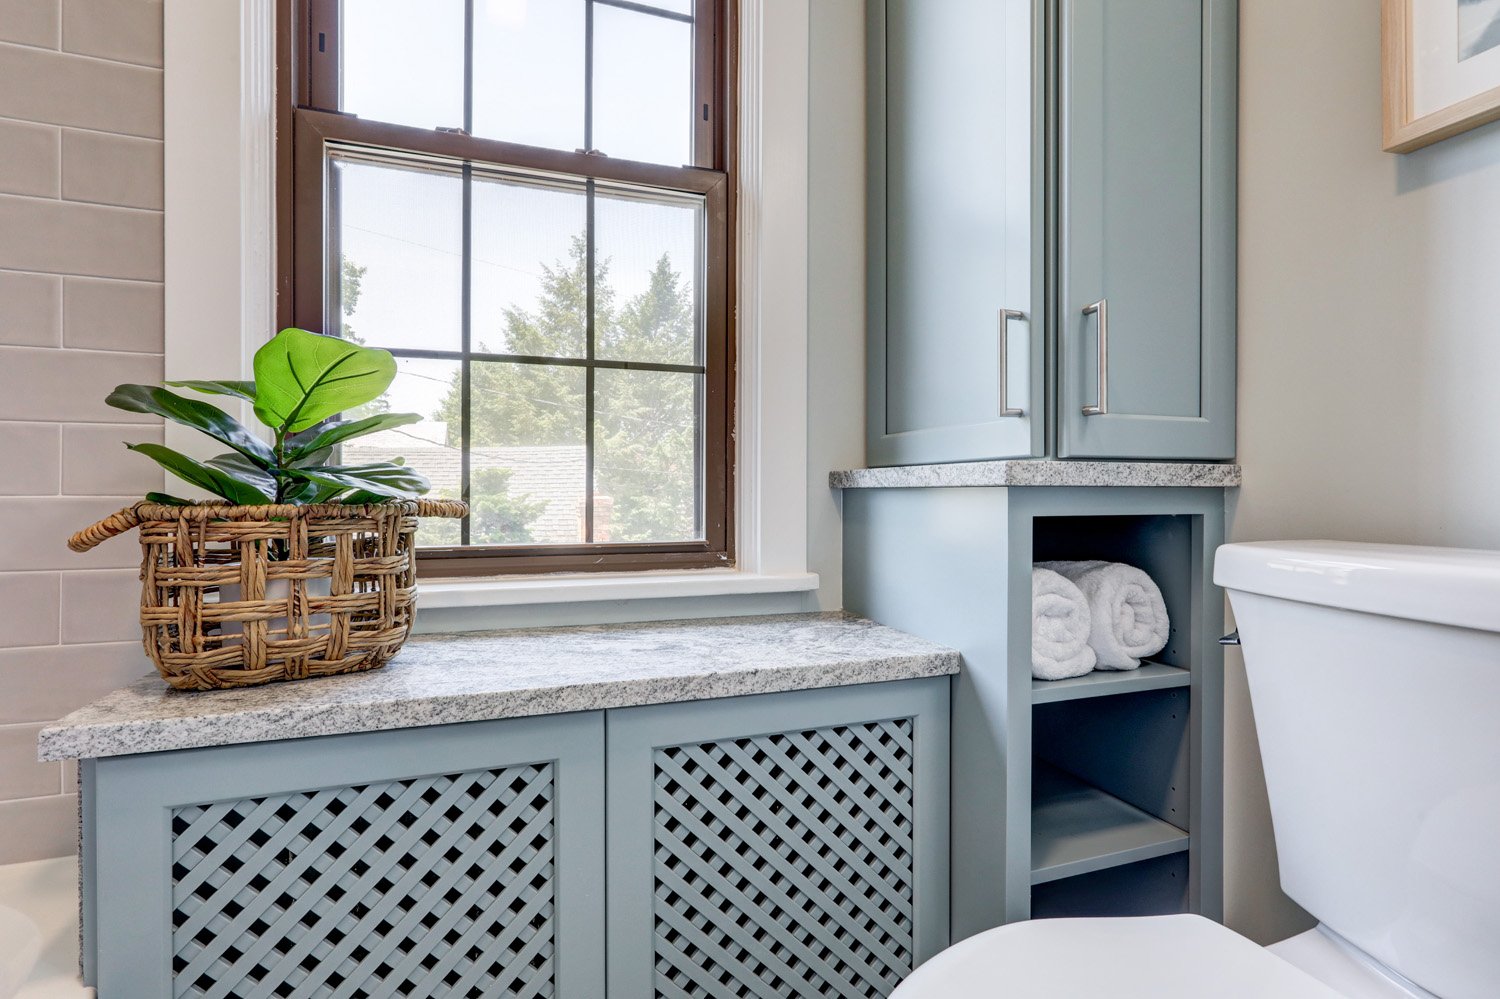 Blue cabinets and radiator cover in Lancaster Bathroom Remodel